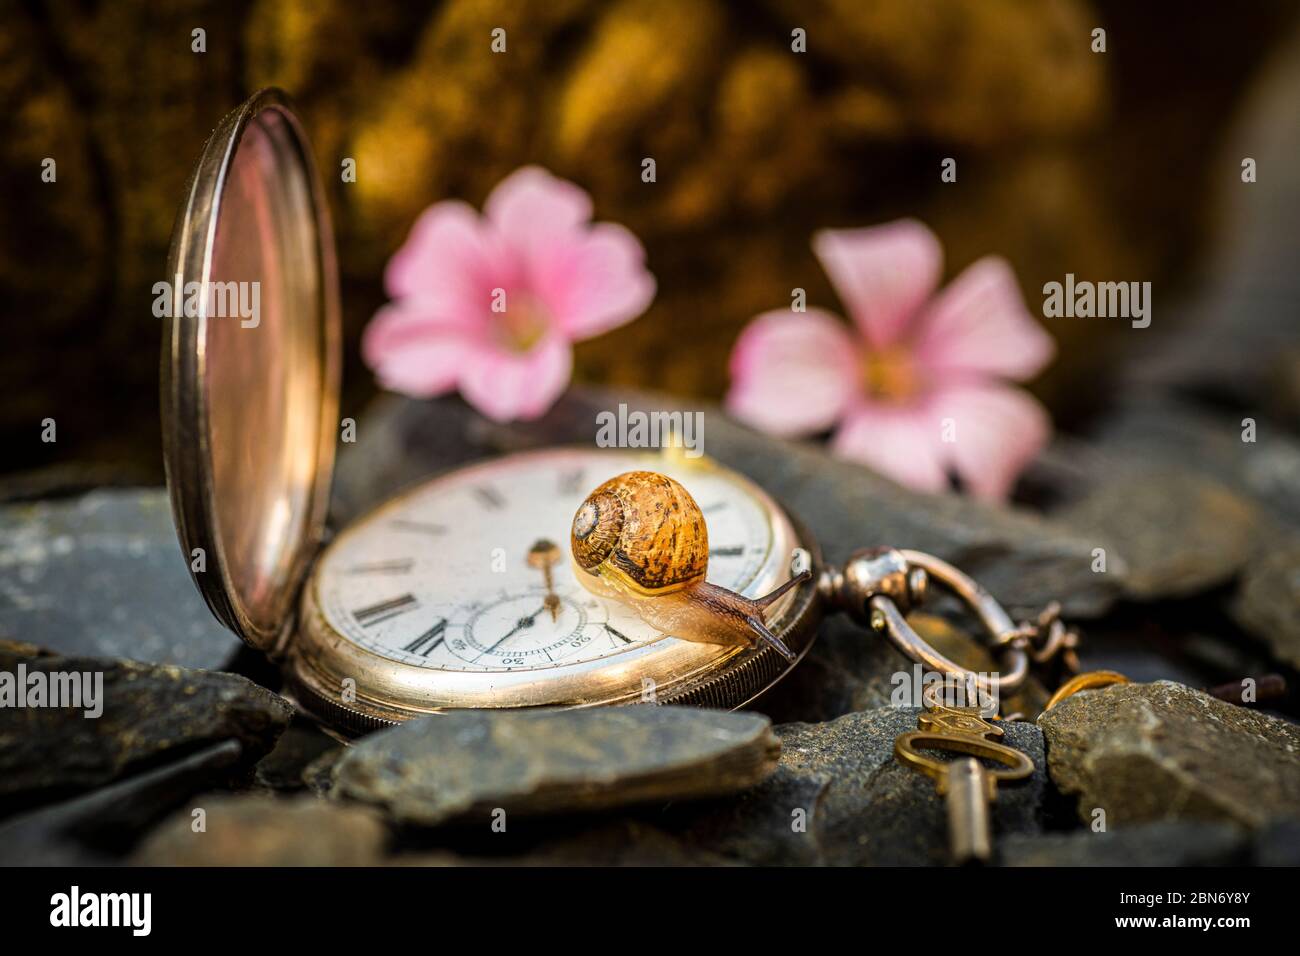 Antique Watch with Snail Stock Photo